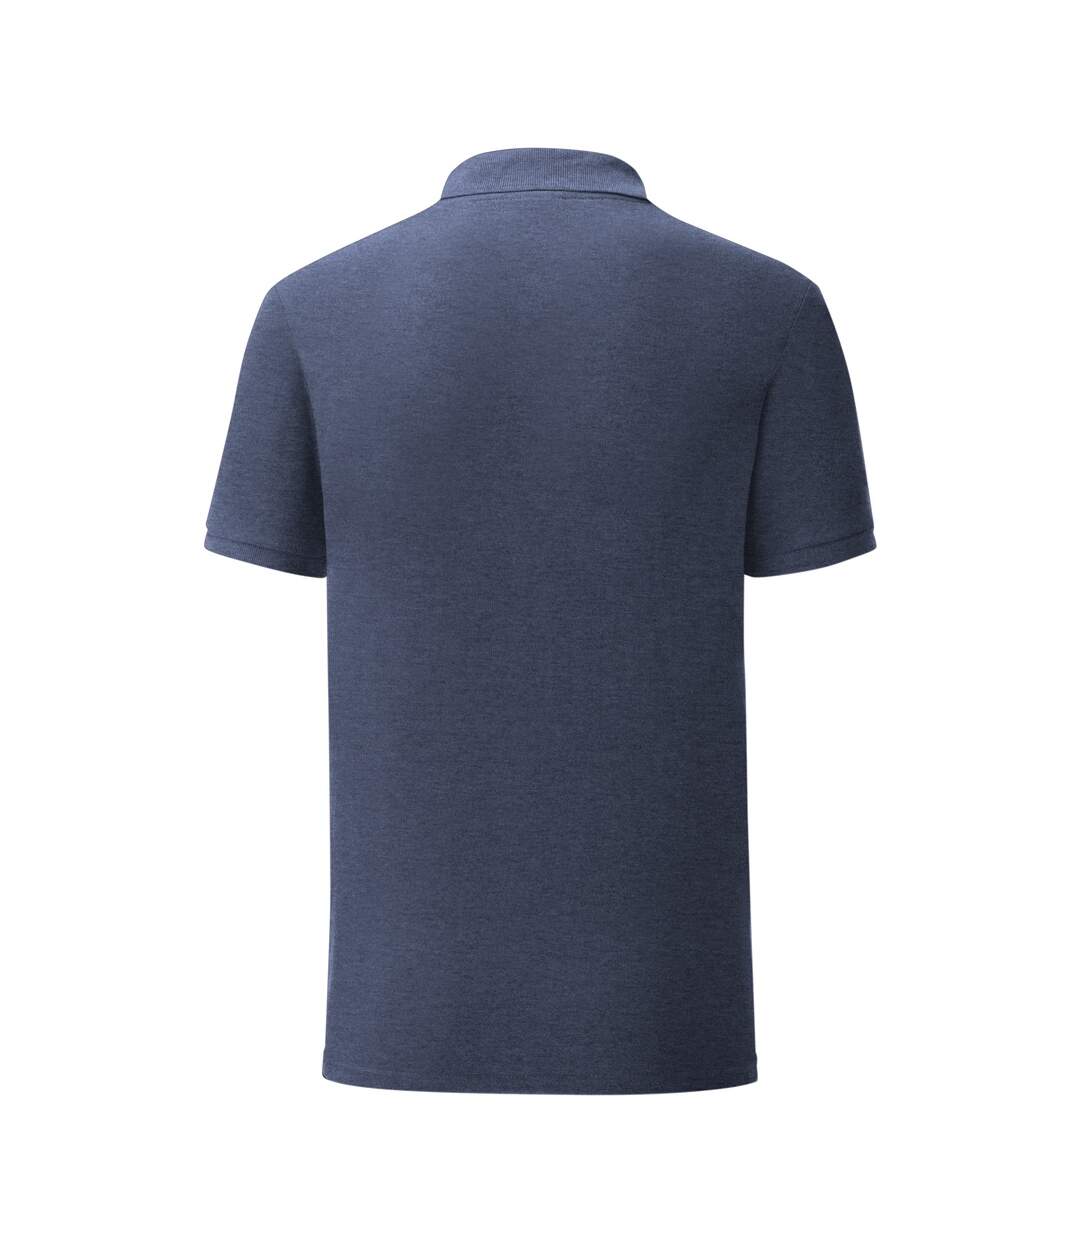 Fruit Of The Loom Mens Iconic Pique Polo Shirt (Heather Navy) - UTPC3571